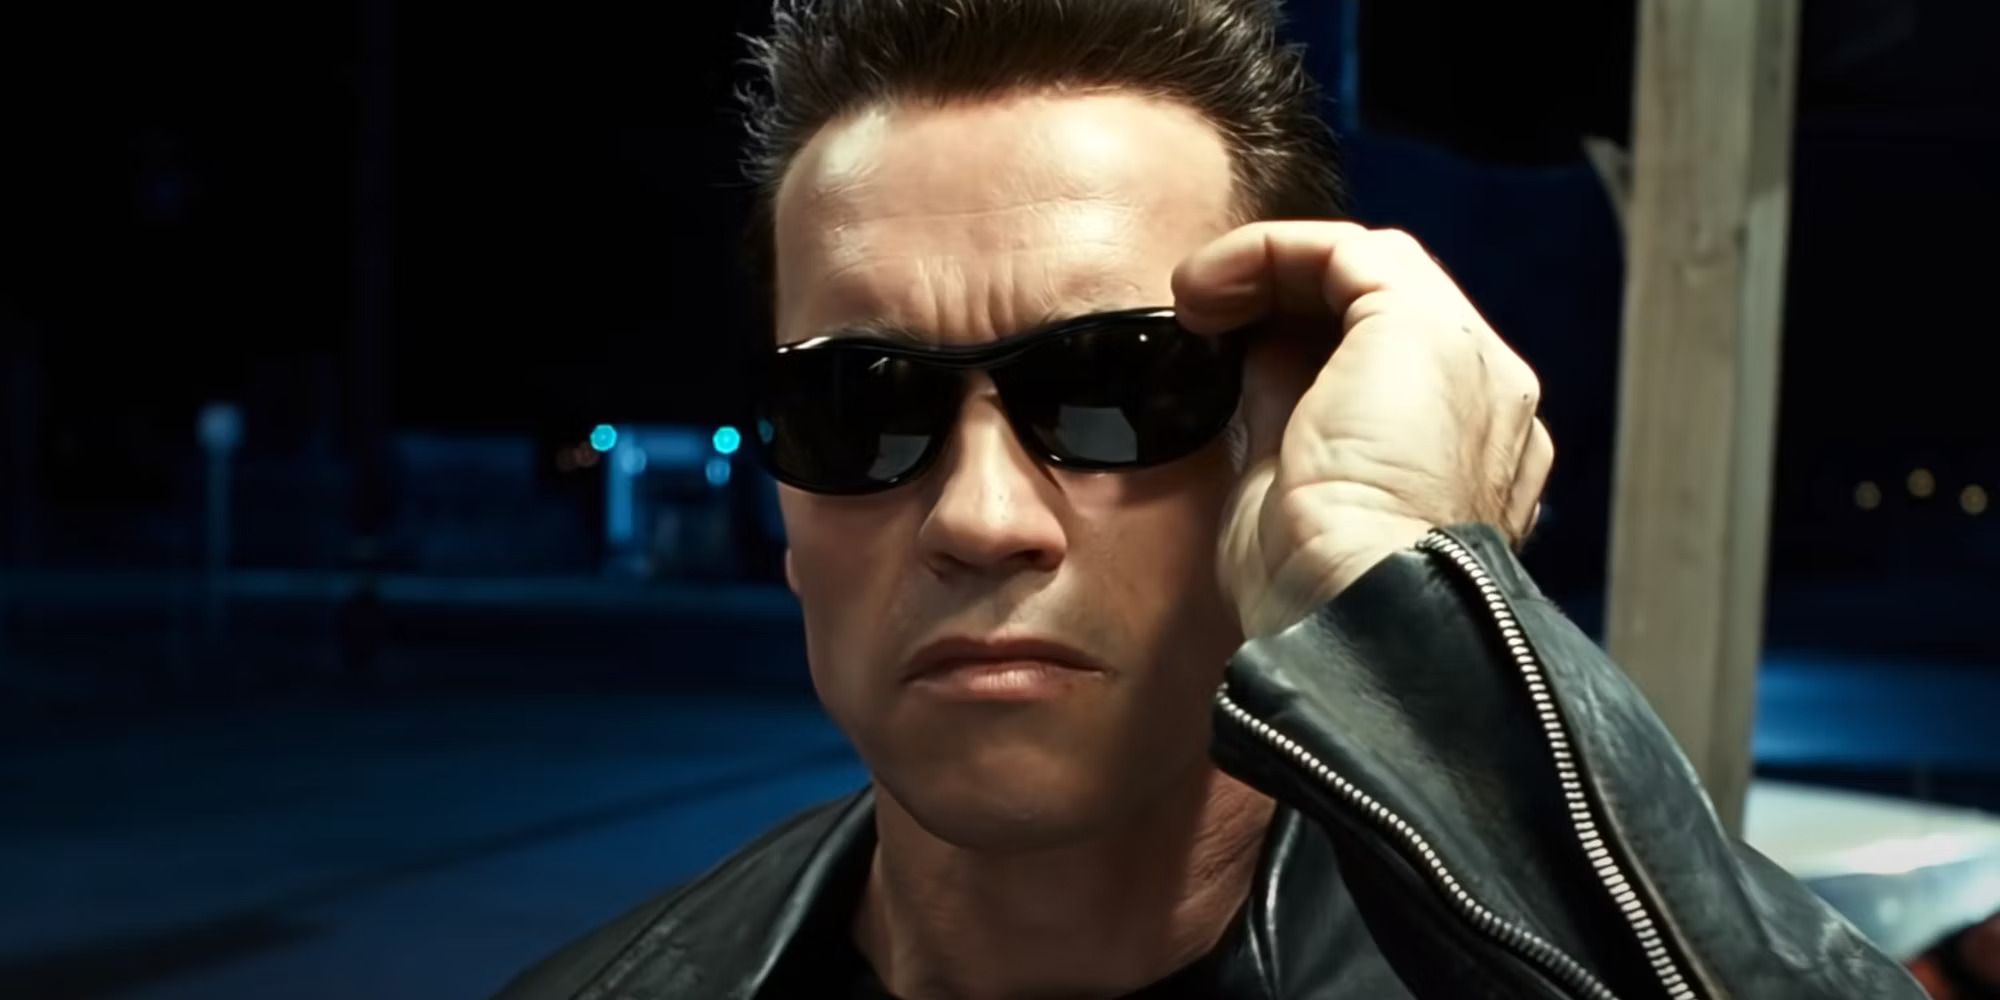 Arnold Schwarzenegger as the T-800 wearing sunglasses in 'Terminator 2: Judgment Day'